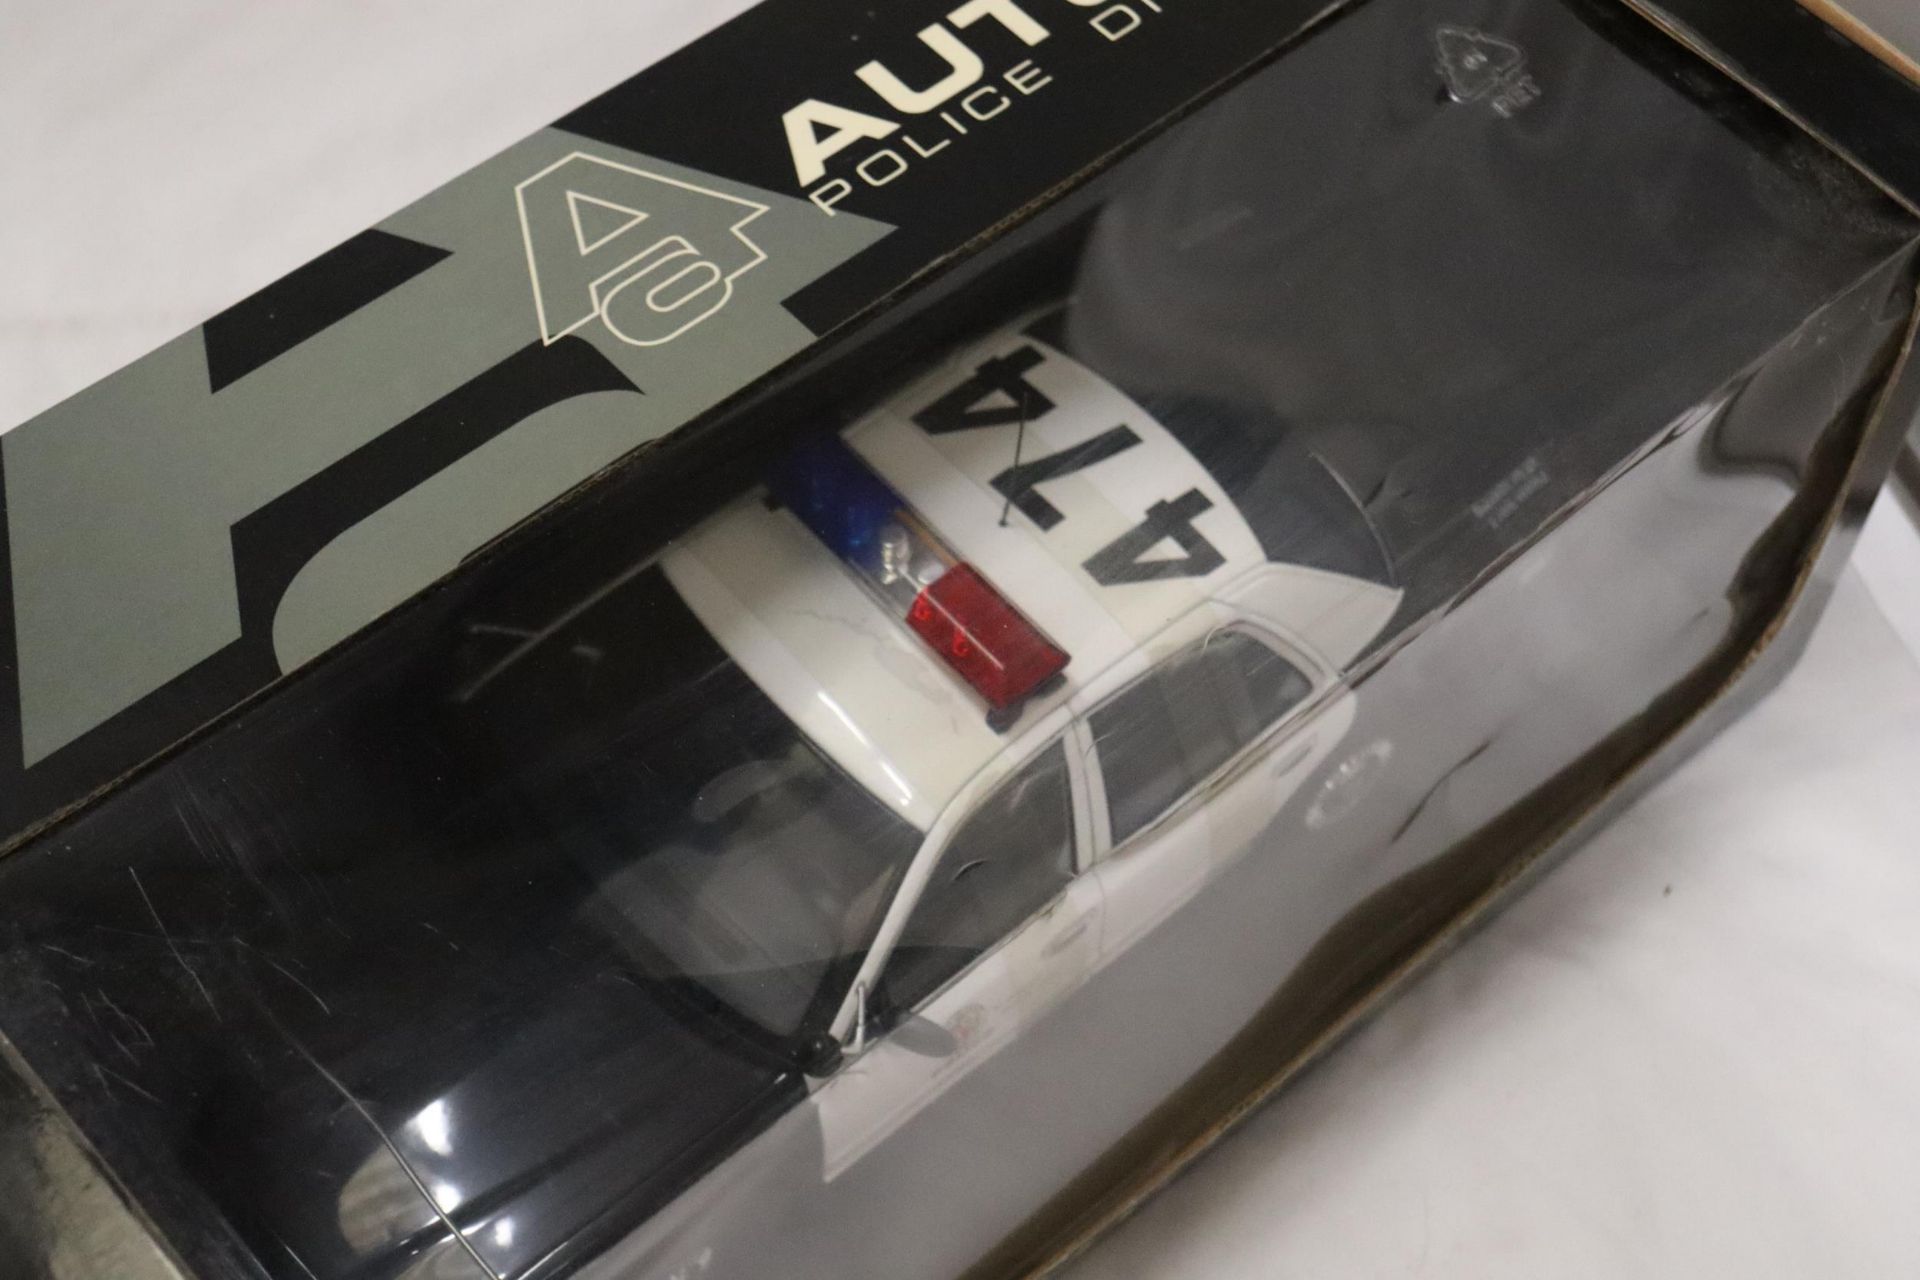 AN AUTO ART, POLICE DIVISION CAR, SCALE 1:18, AS NEW IN BOX - Image 4 of 7